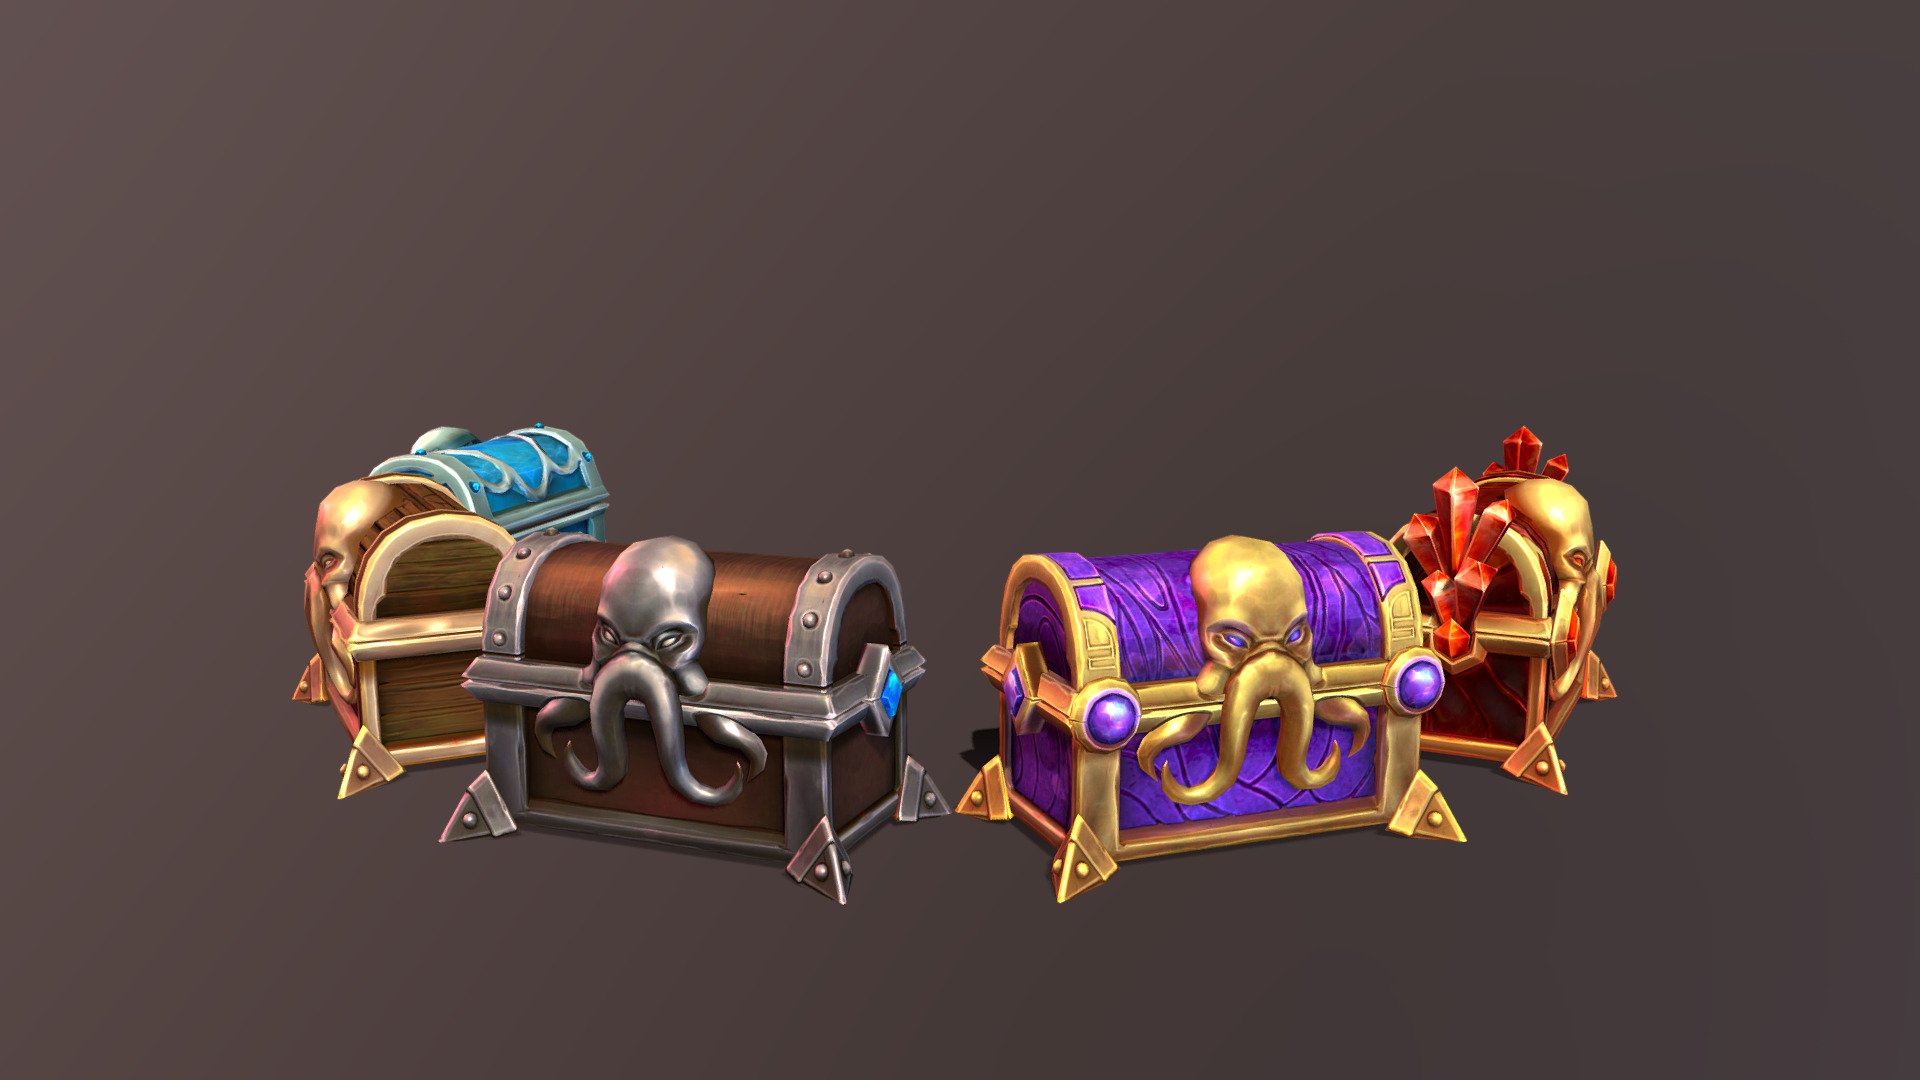 Assets I made for the PVP mode of Ludia's game “Warriors of Waterdeep” https://play.google.com/store/apps/details?id=com.ludia.dnd

Interior is modelled but the back of the chests is never visible so reusing texture there even though it's not super appropriate was not very problematic 3d model